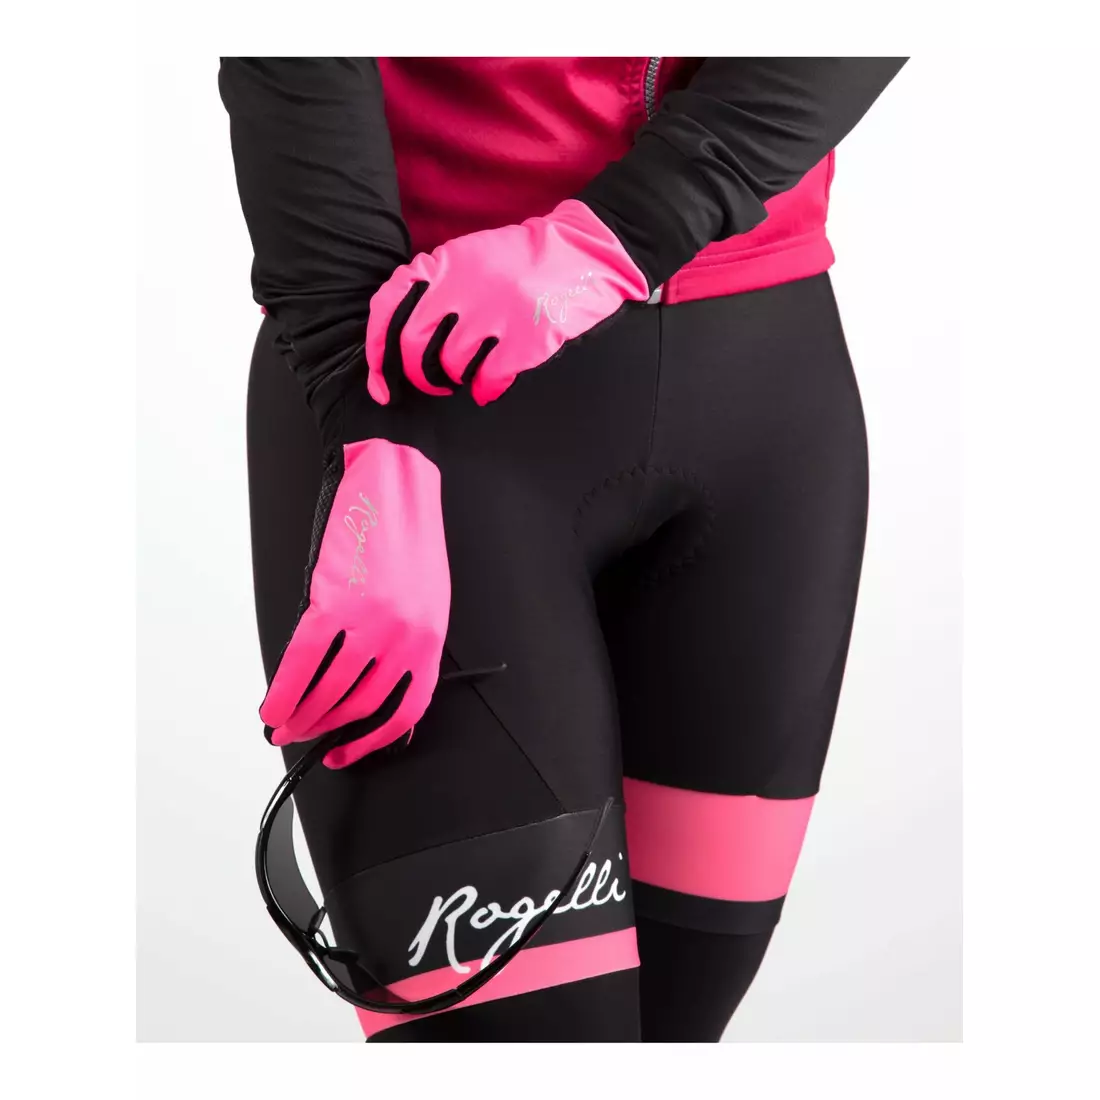 ROGELLI LAVAL women's thermal cycling/running gloves 010.662